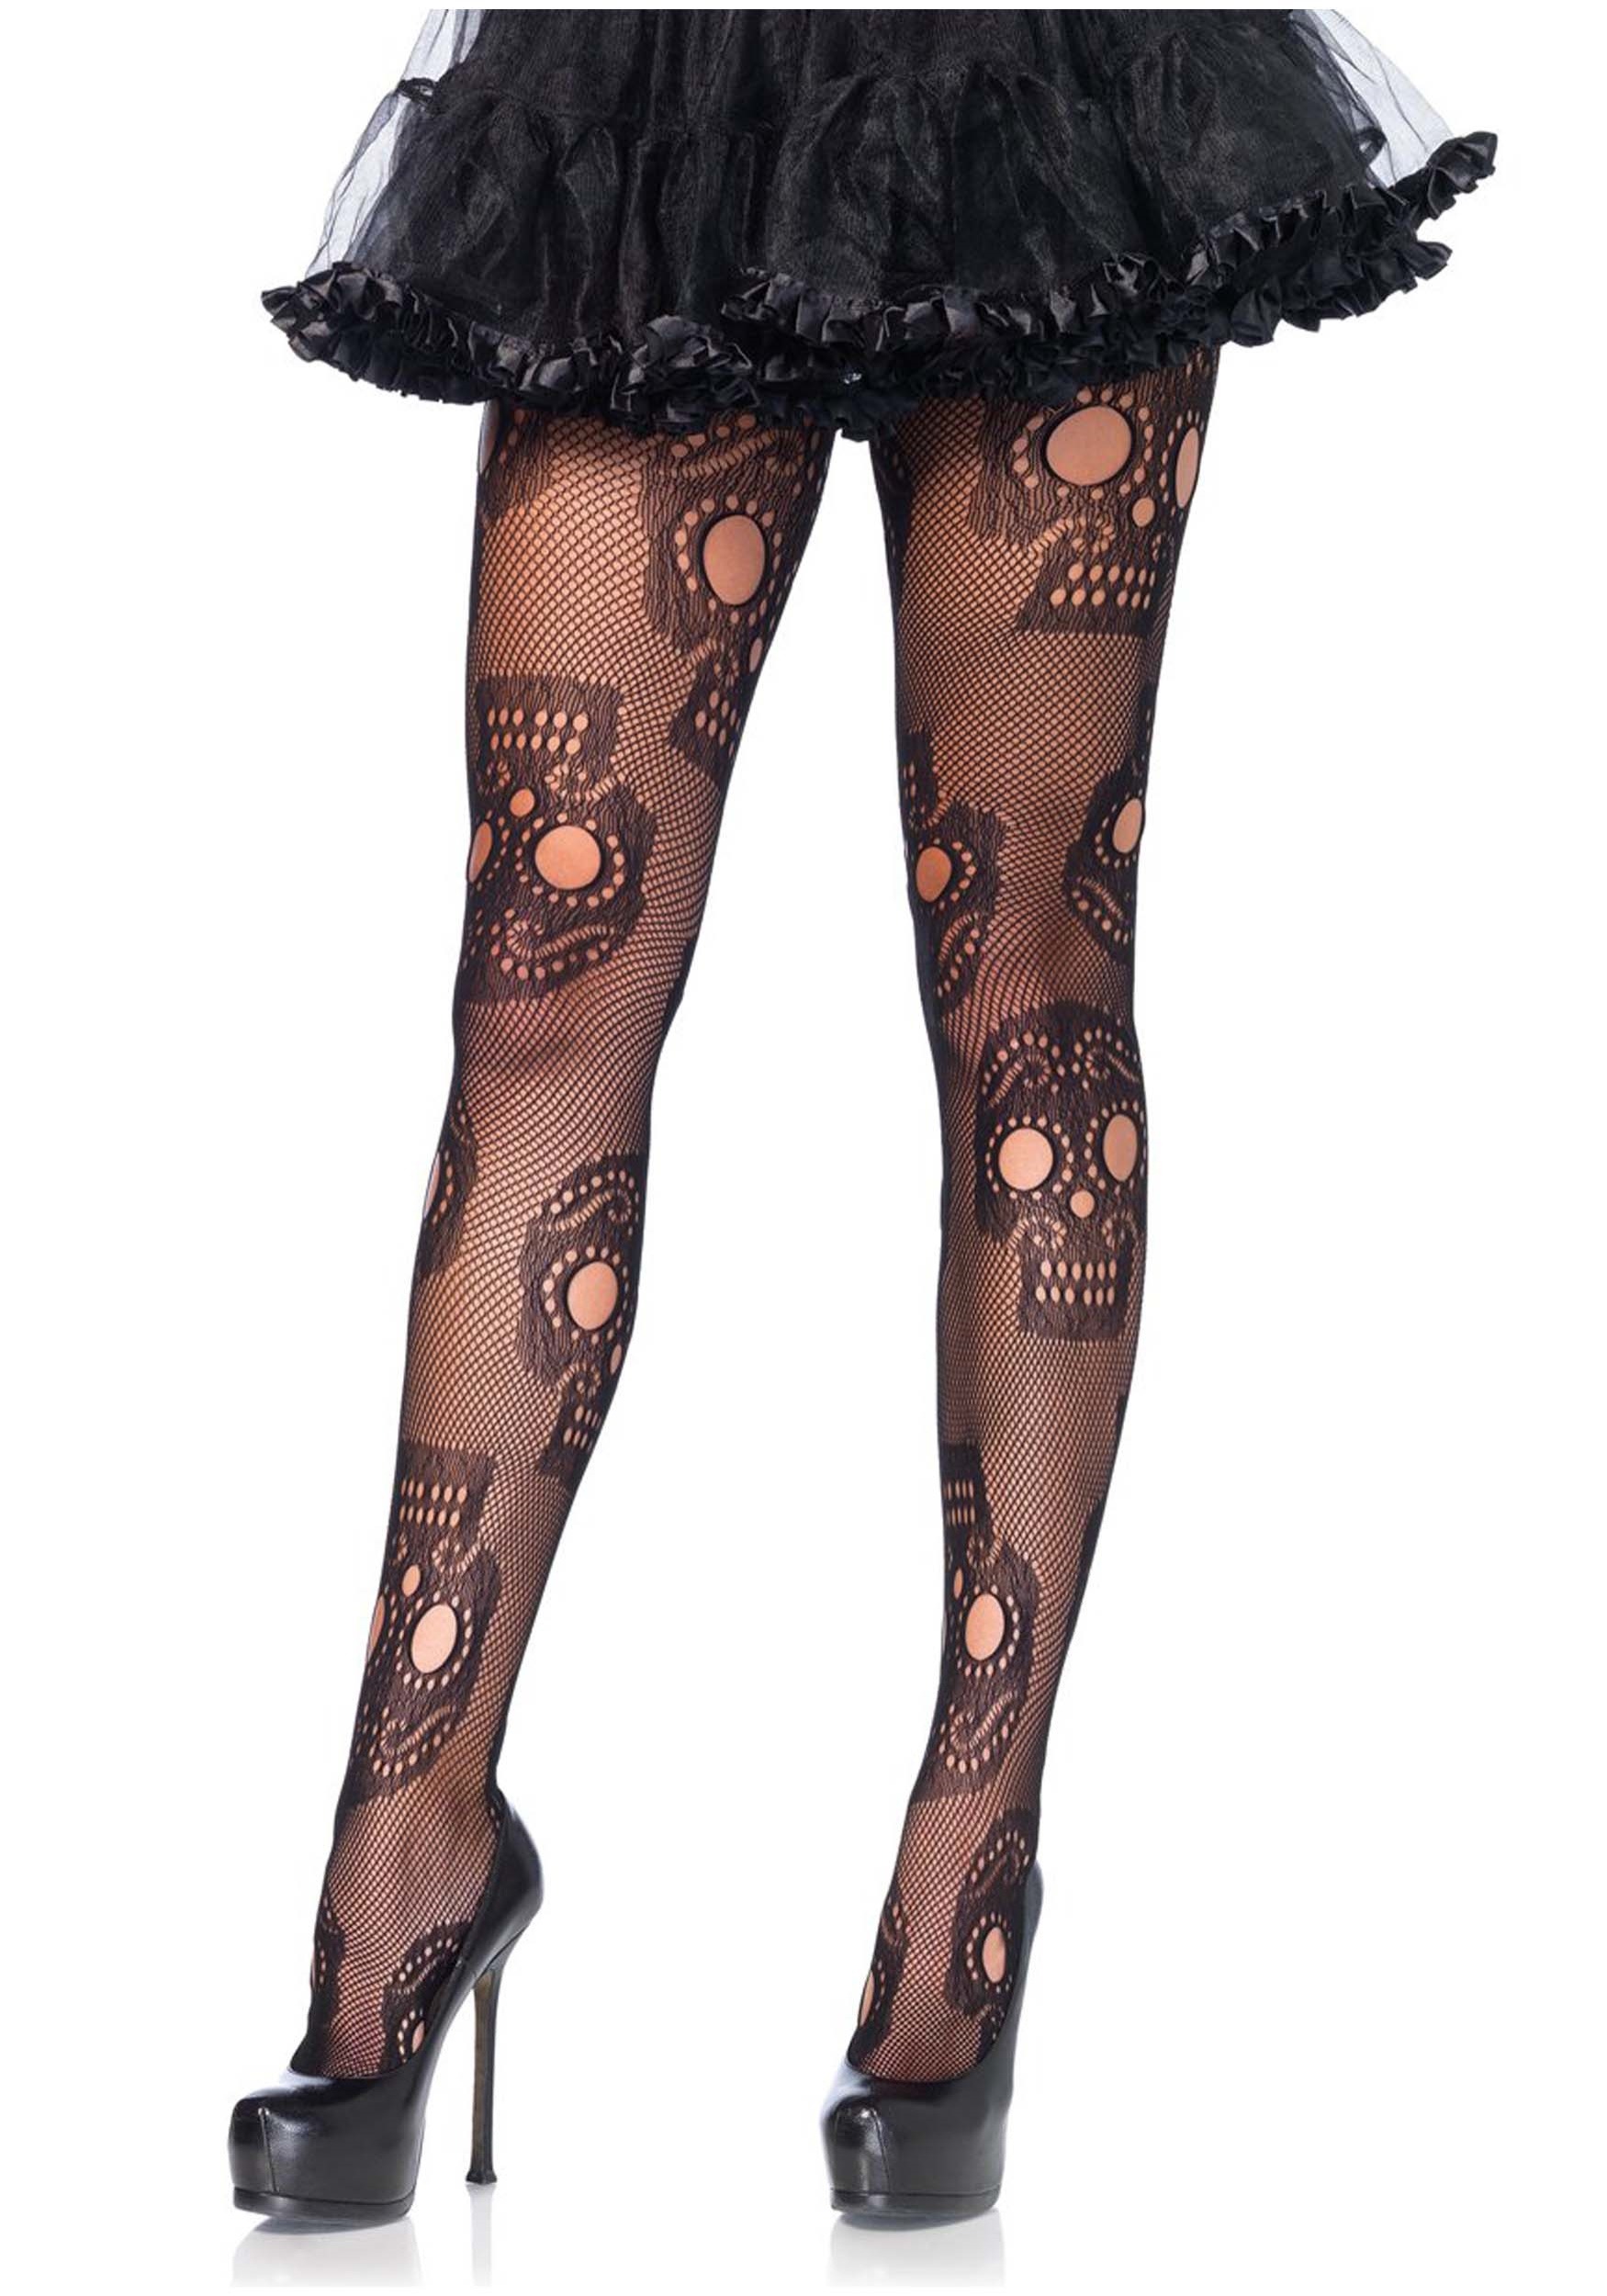 Plus Size Women's Day Of The Dead Tights